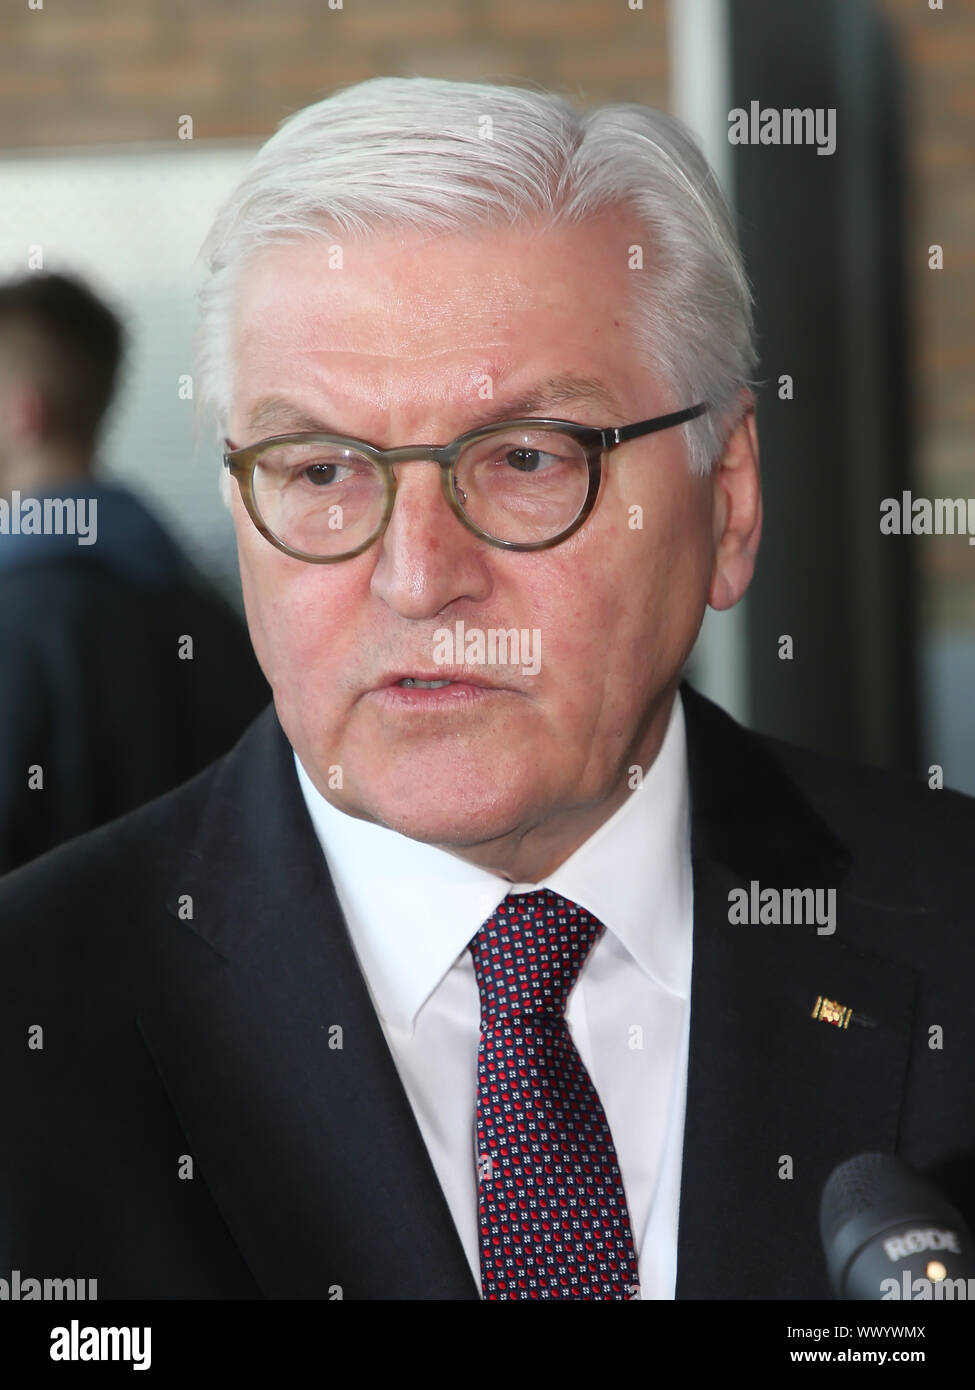 Federal President of the Federal Republic of Germany Dr. Frank-Walter Steinmeier Stock Photo